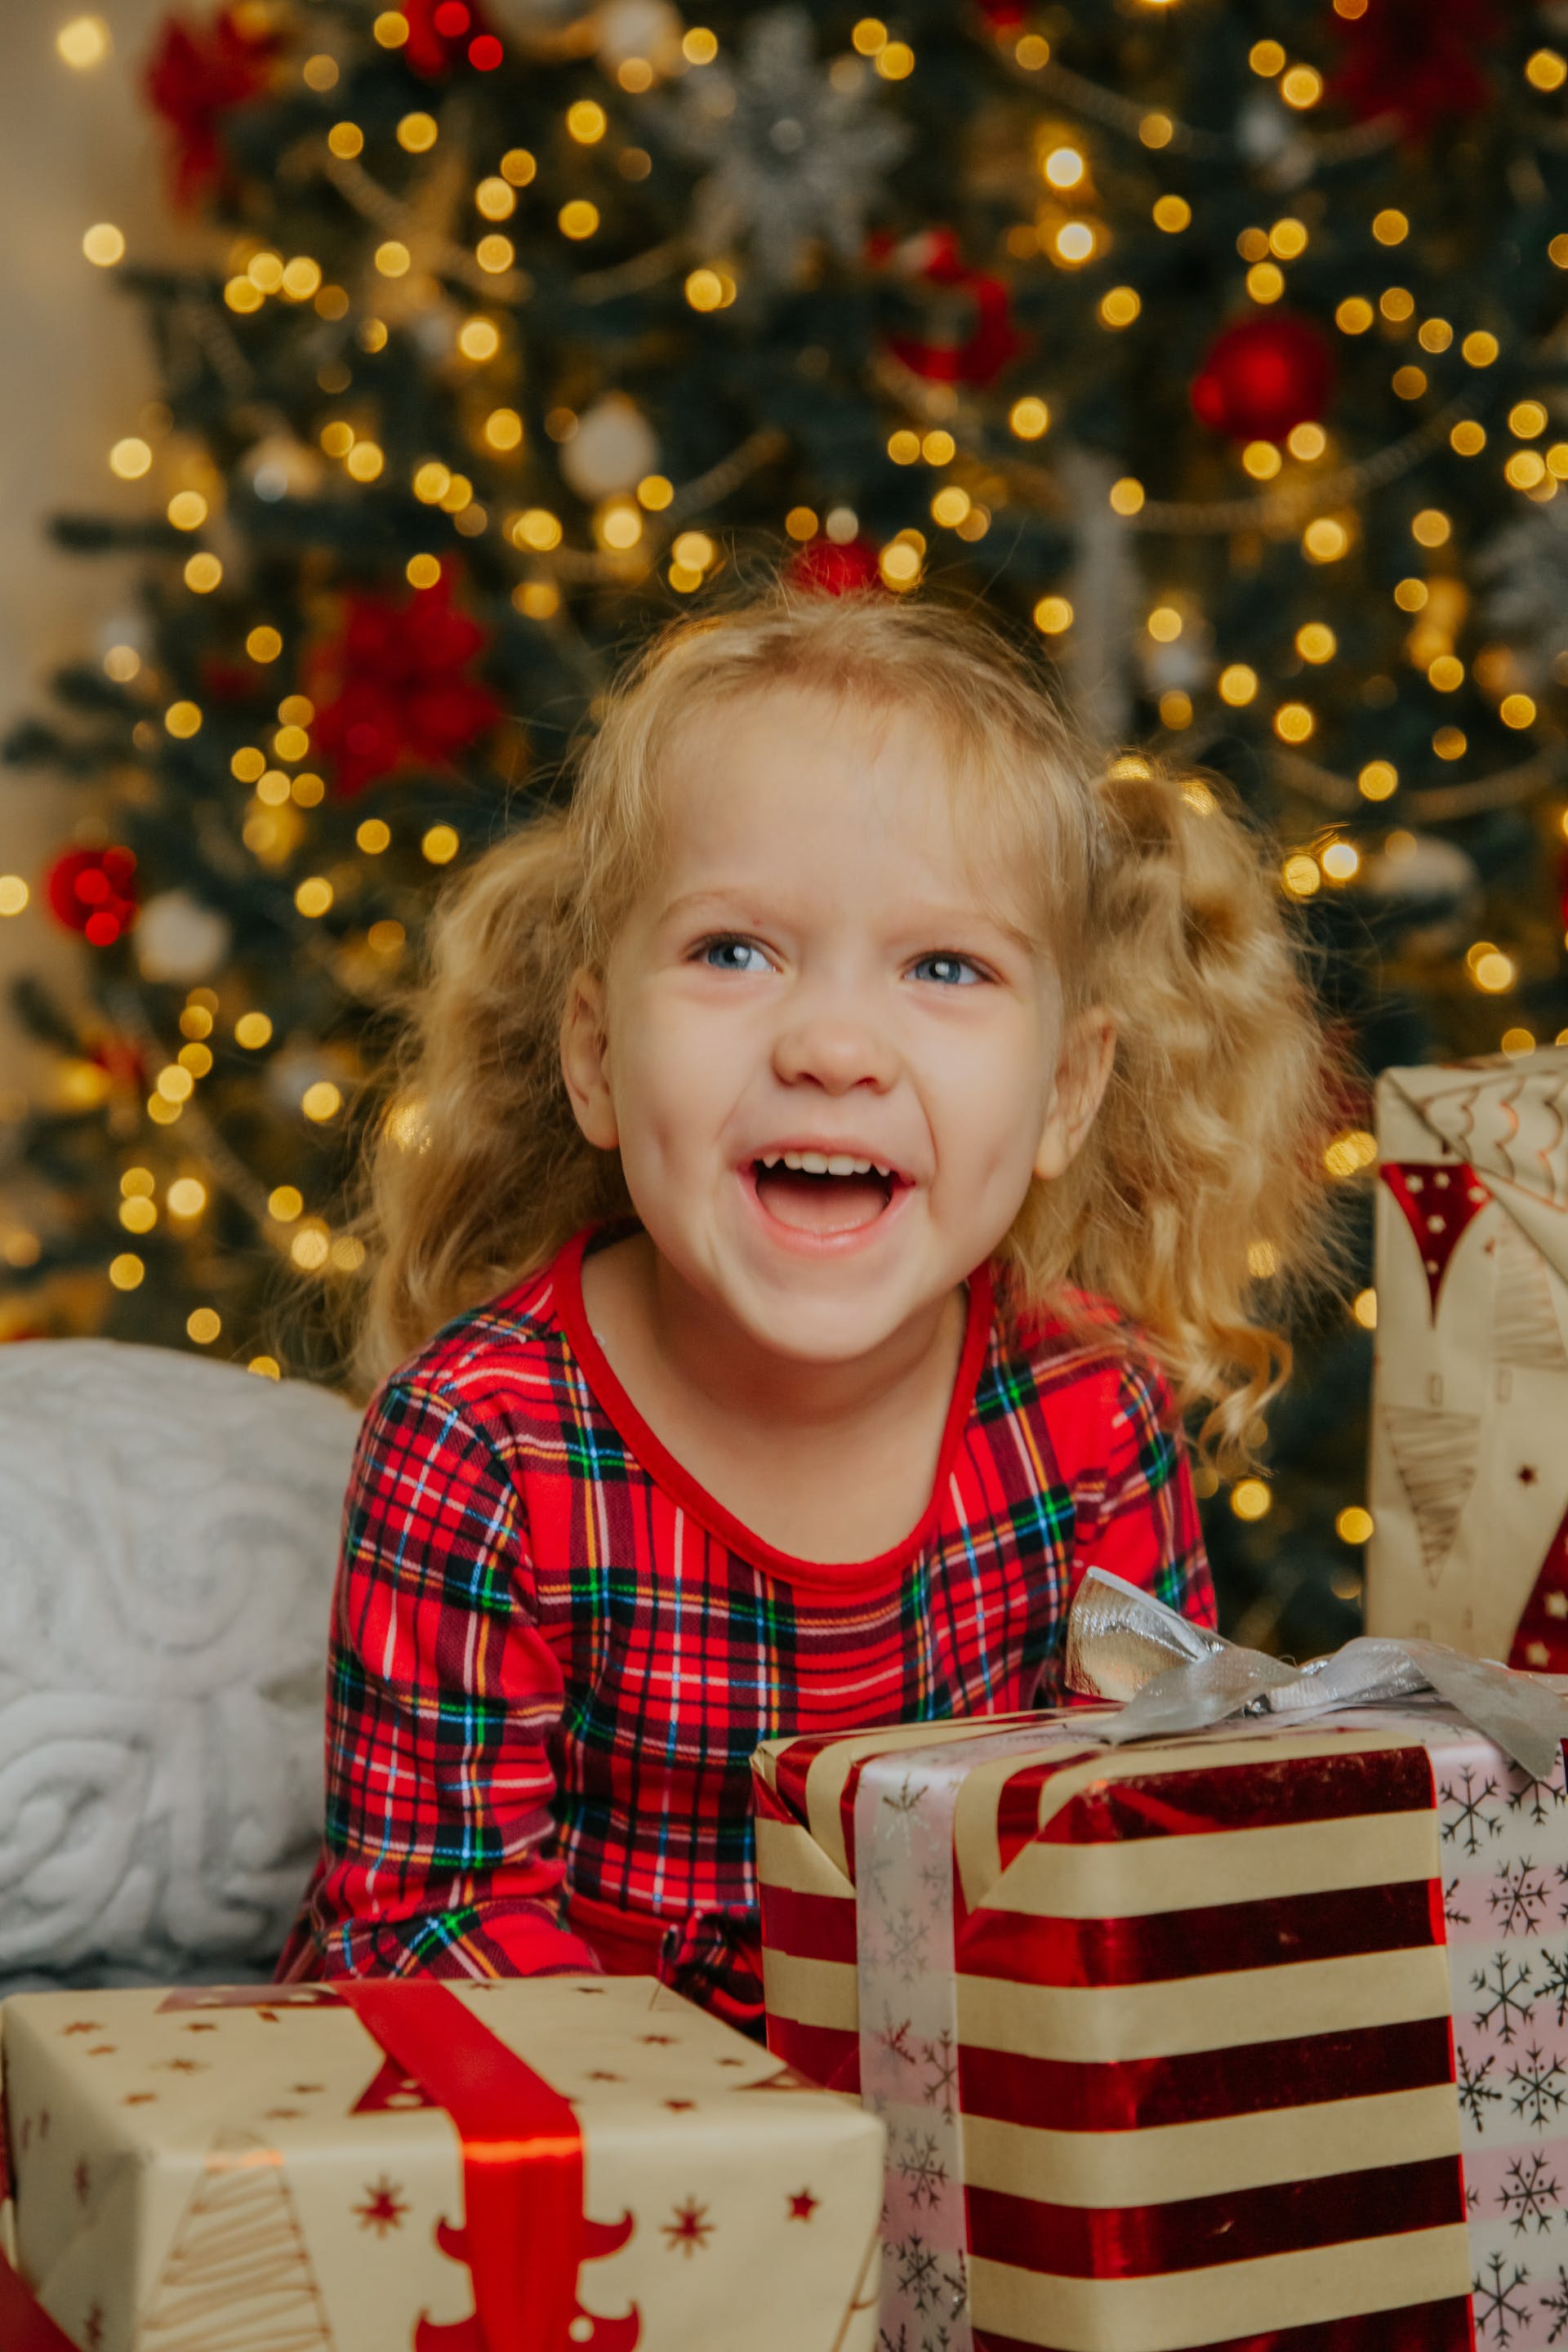 A smiling little girl holding Christmas presents | Source: Pexels